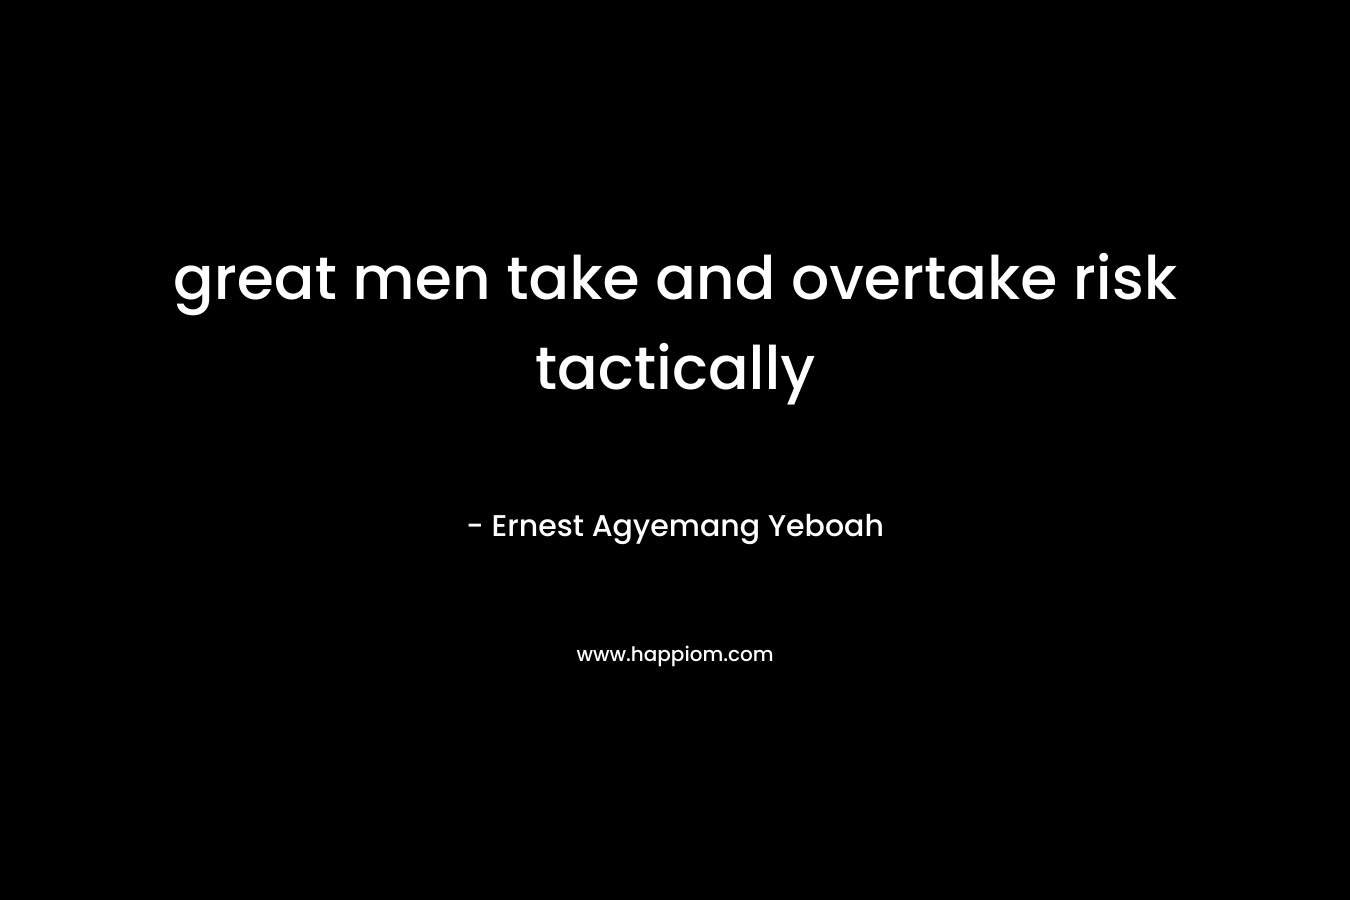 great men take and overtake risk tactically